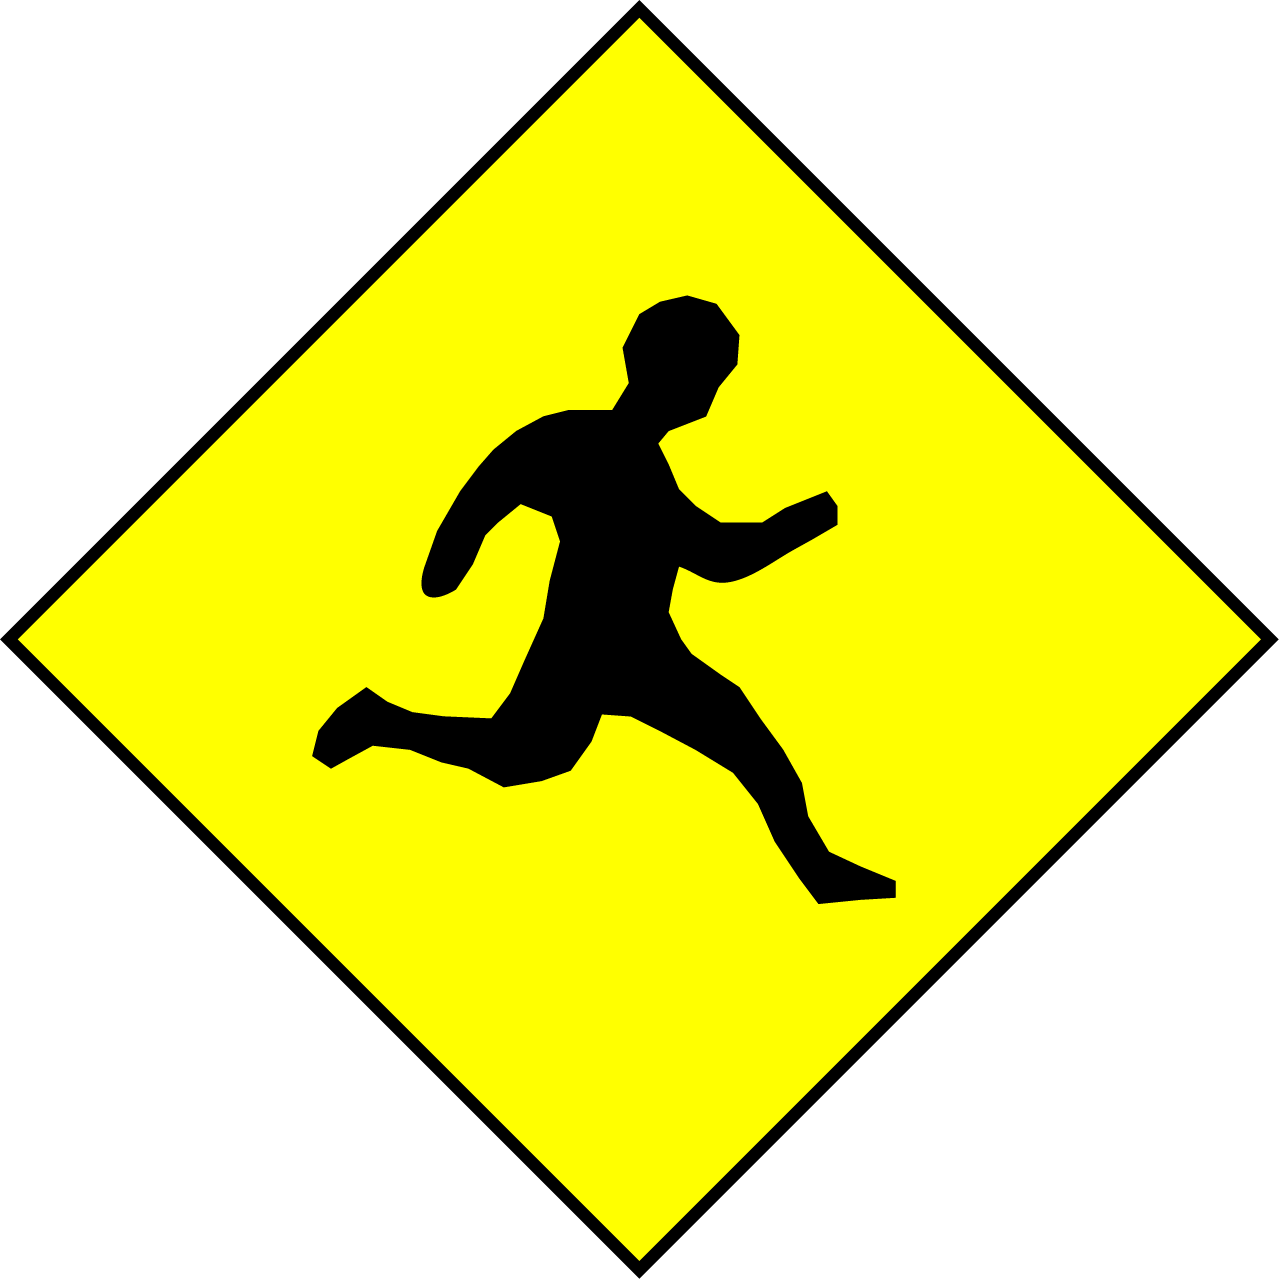 Readme - Md - Slippery When Wet Road Sign (1279x1279)